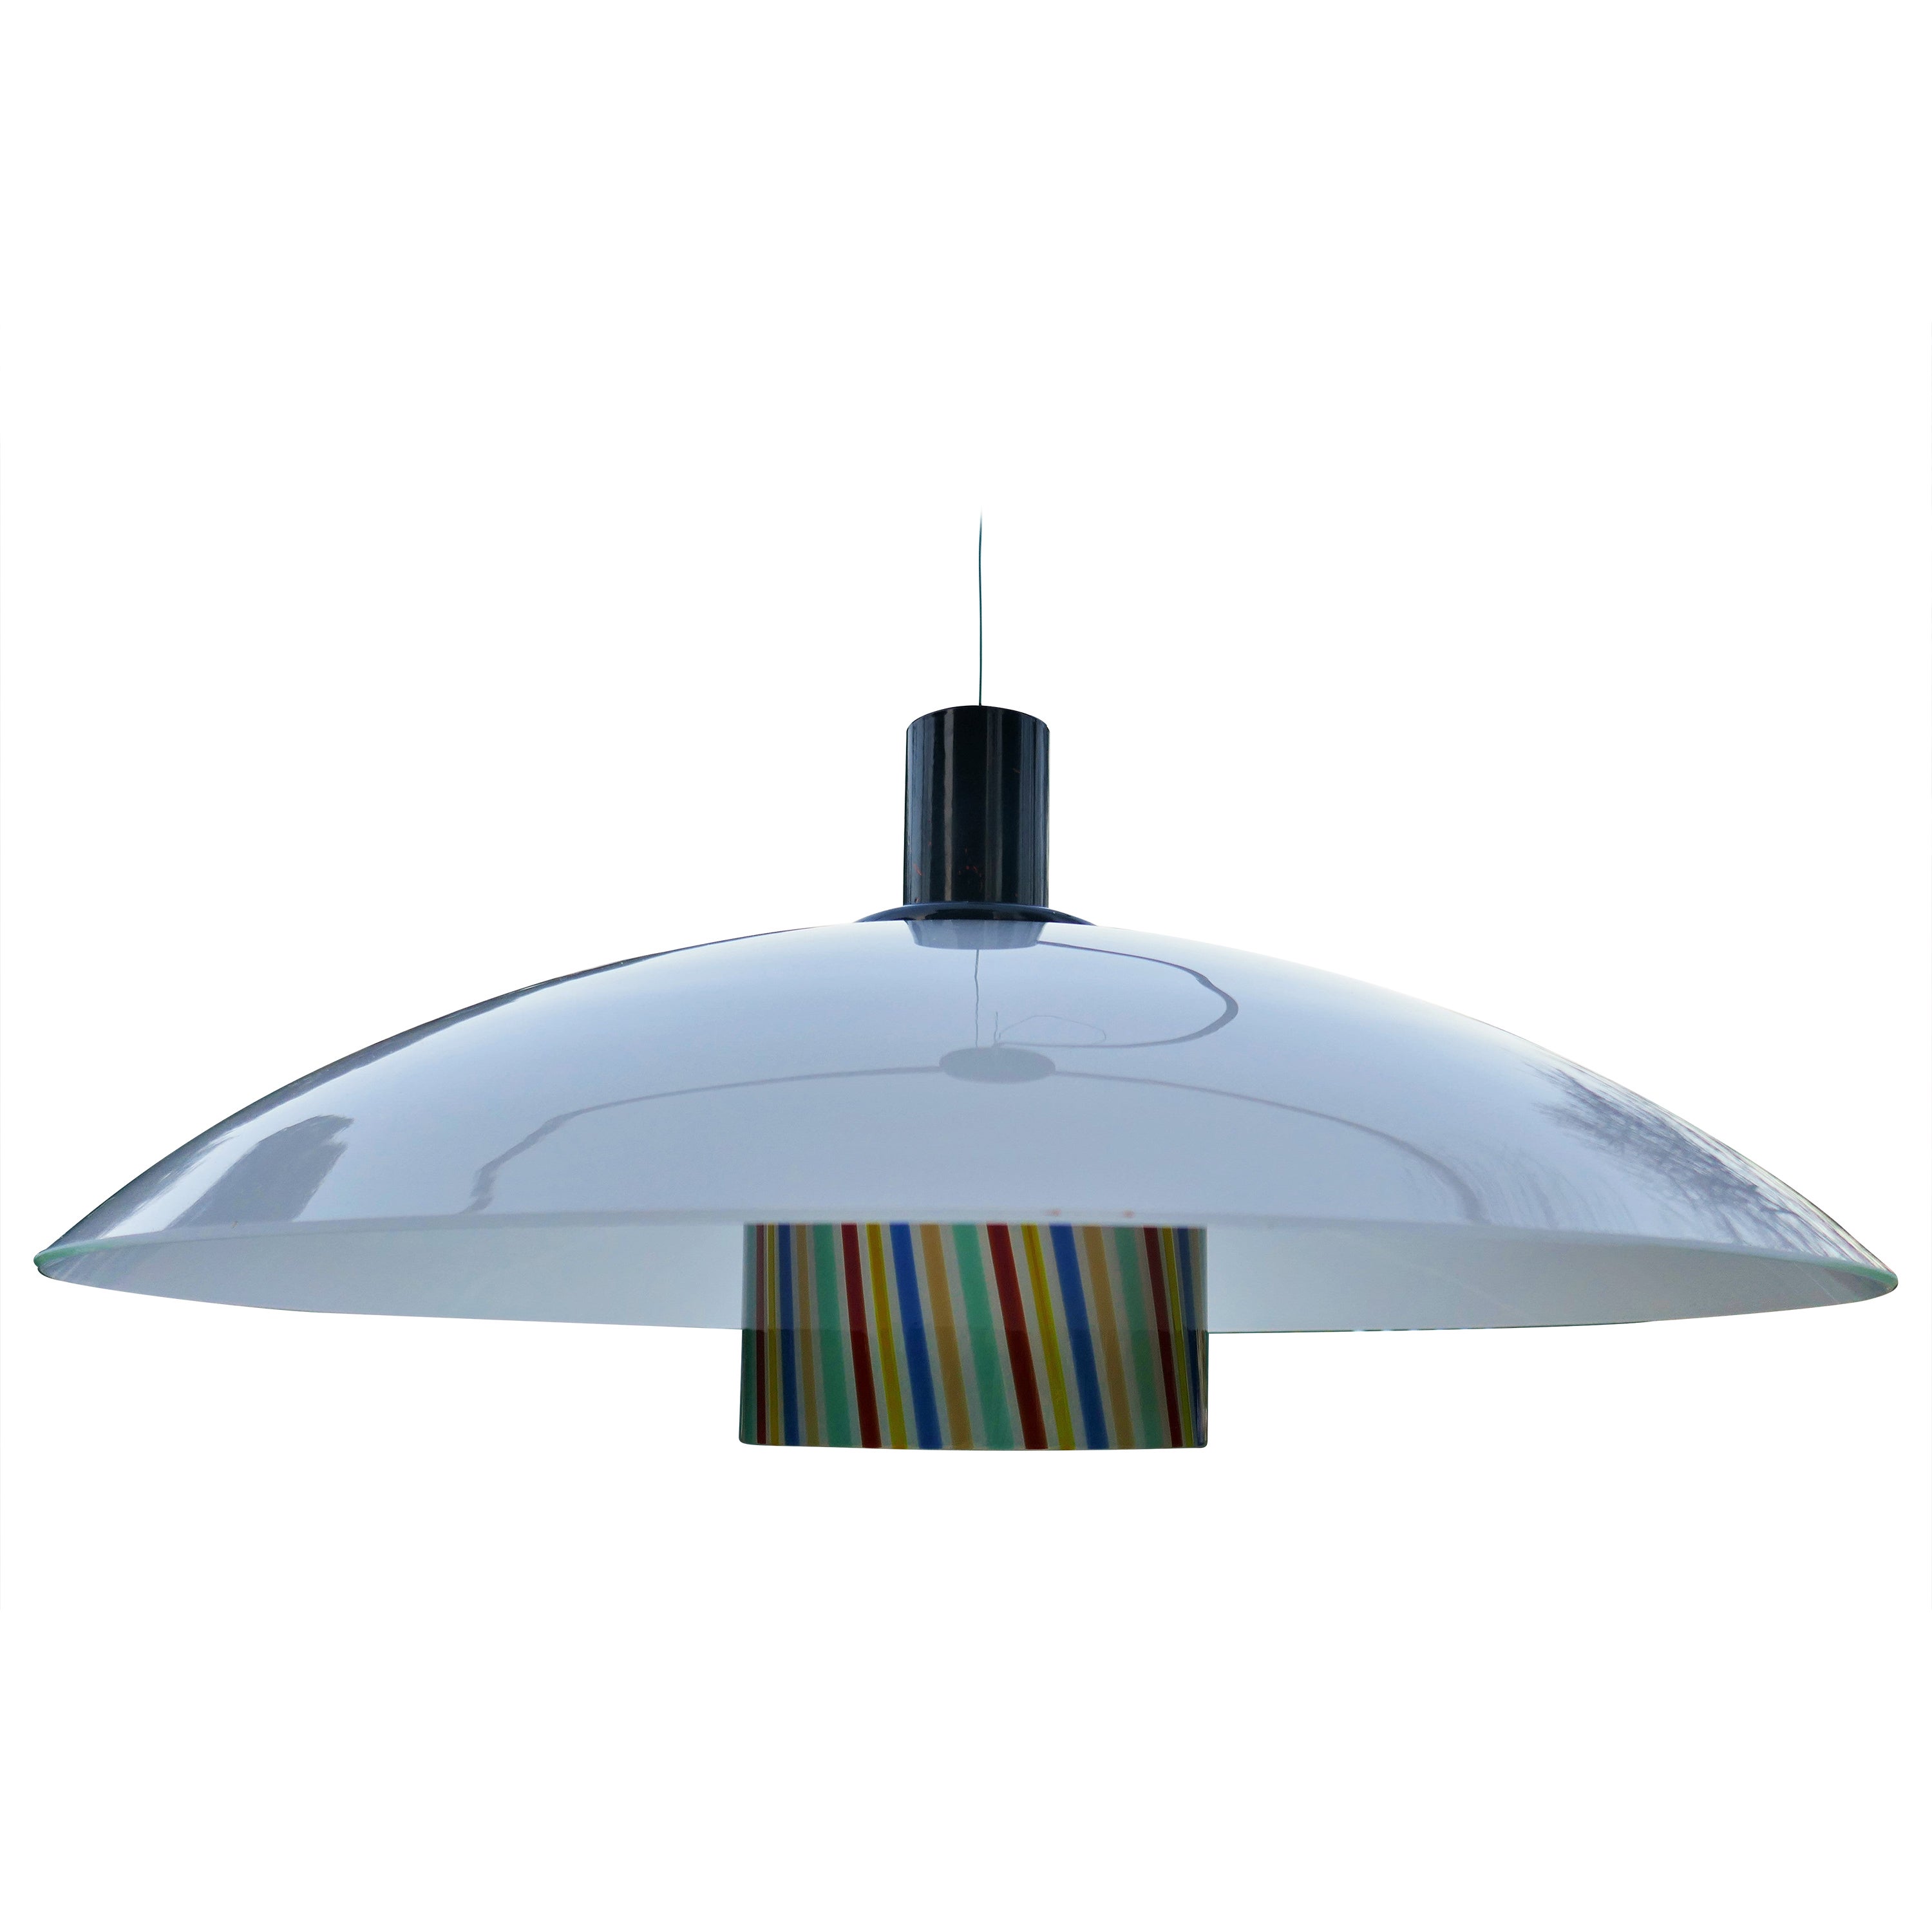 Pendant lamp attributed to Venini Cenedese multicolor reeds